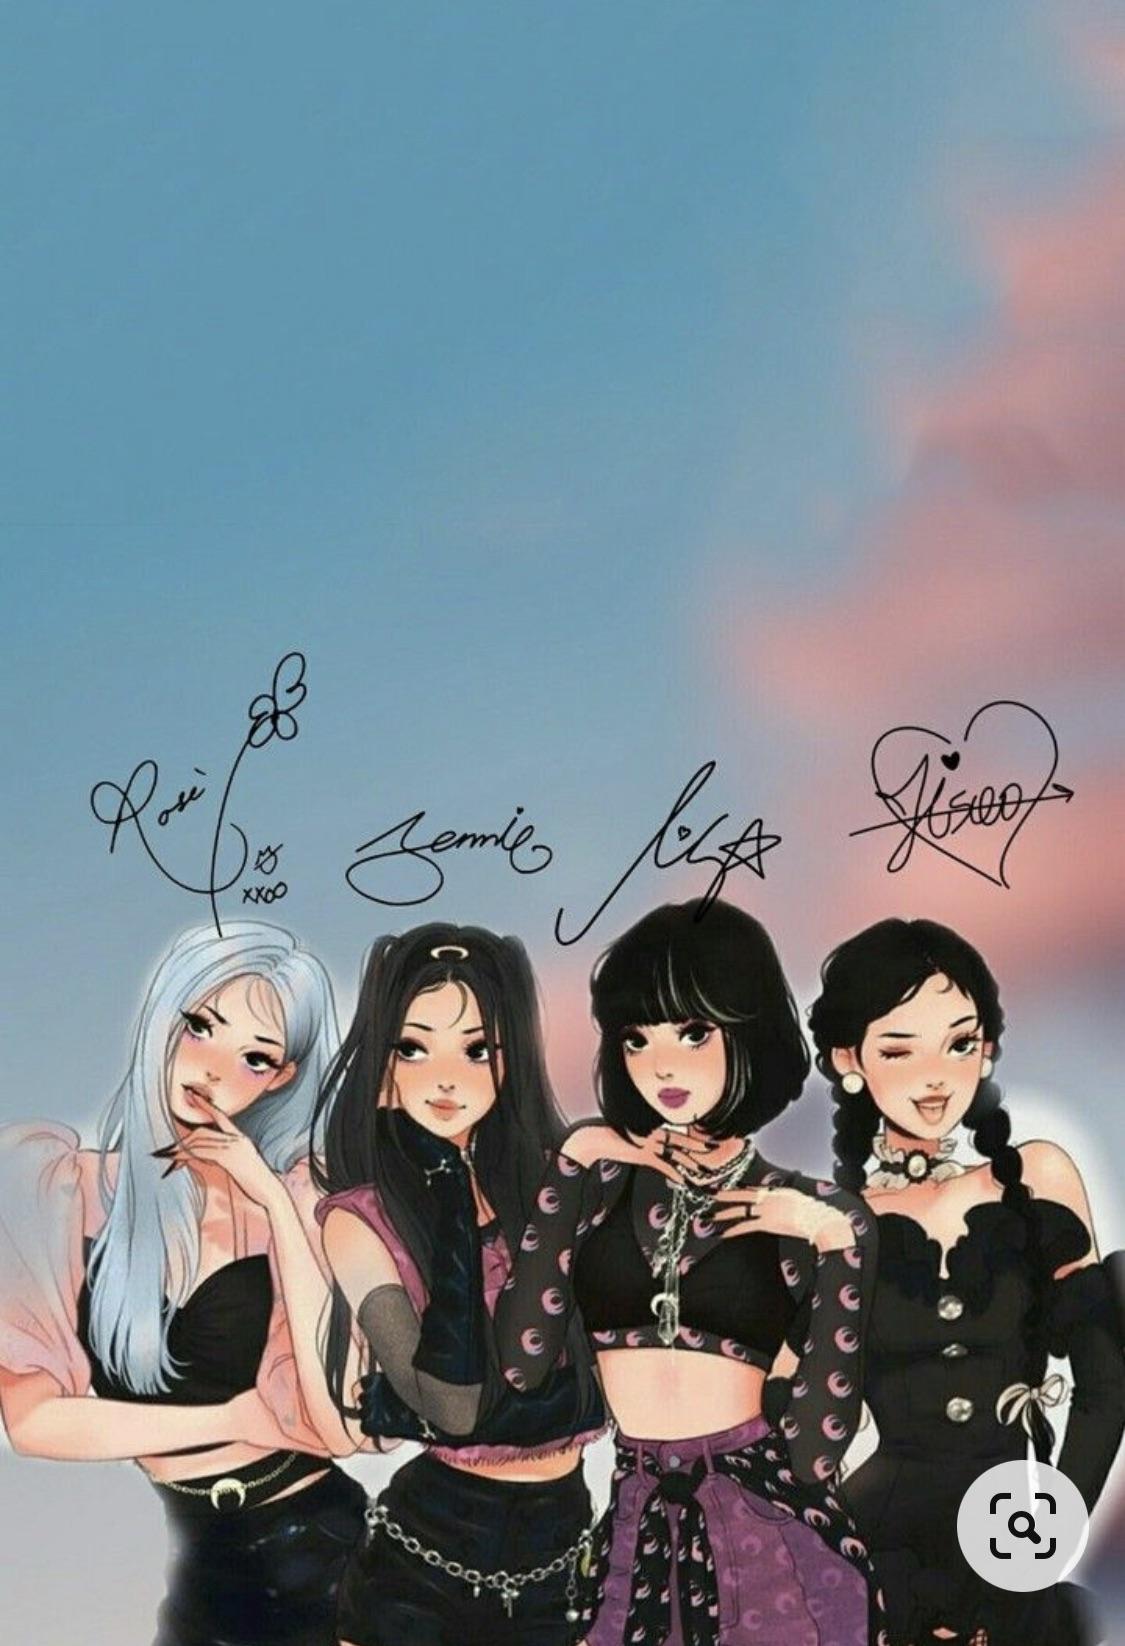 Give me a BLACKPINK song and I’ll rate it out of 10.